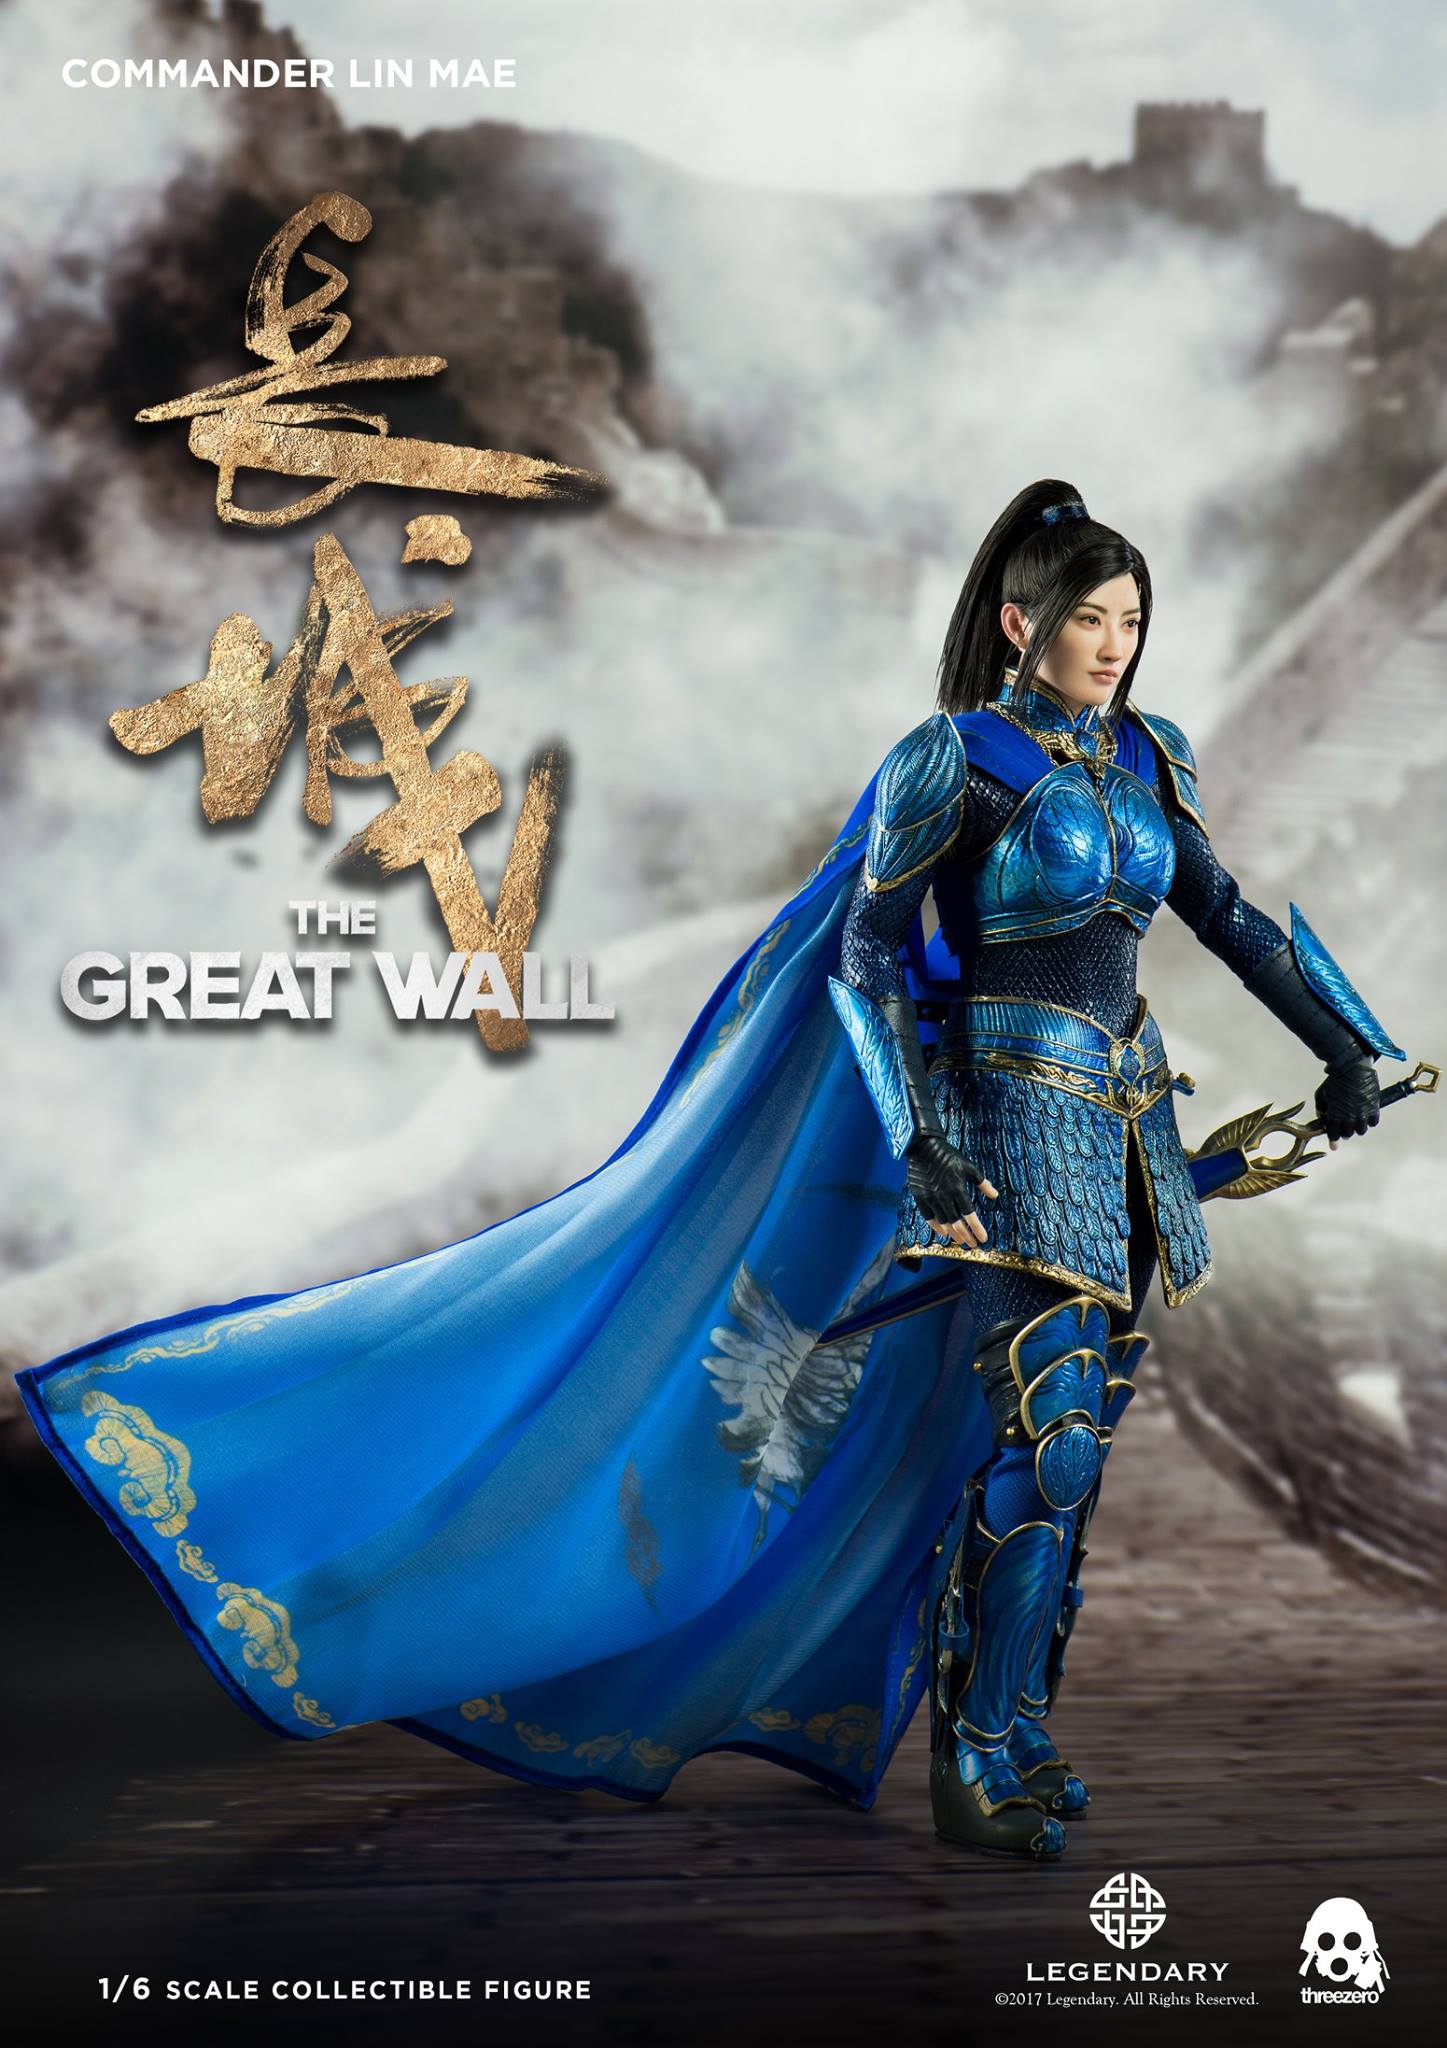 The Great Wall”